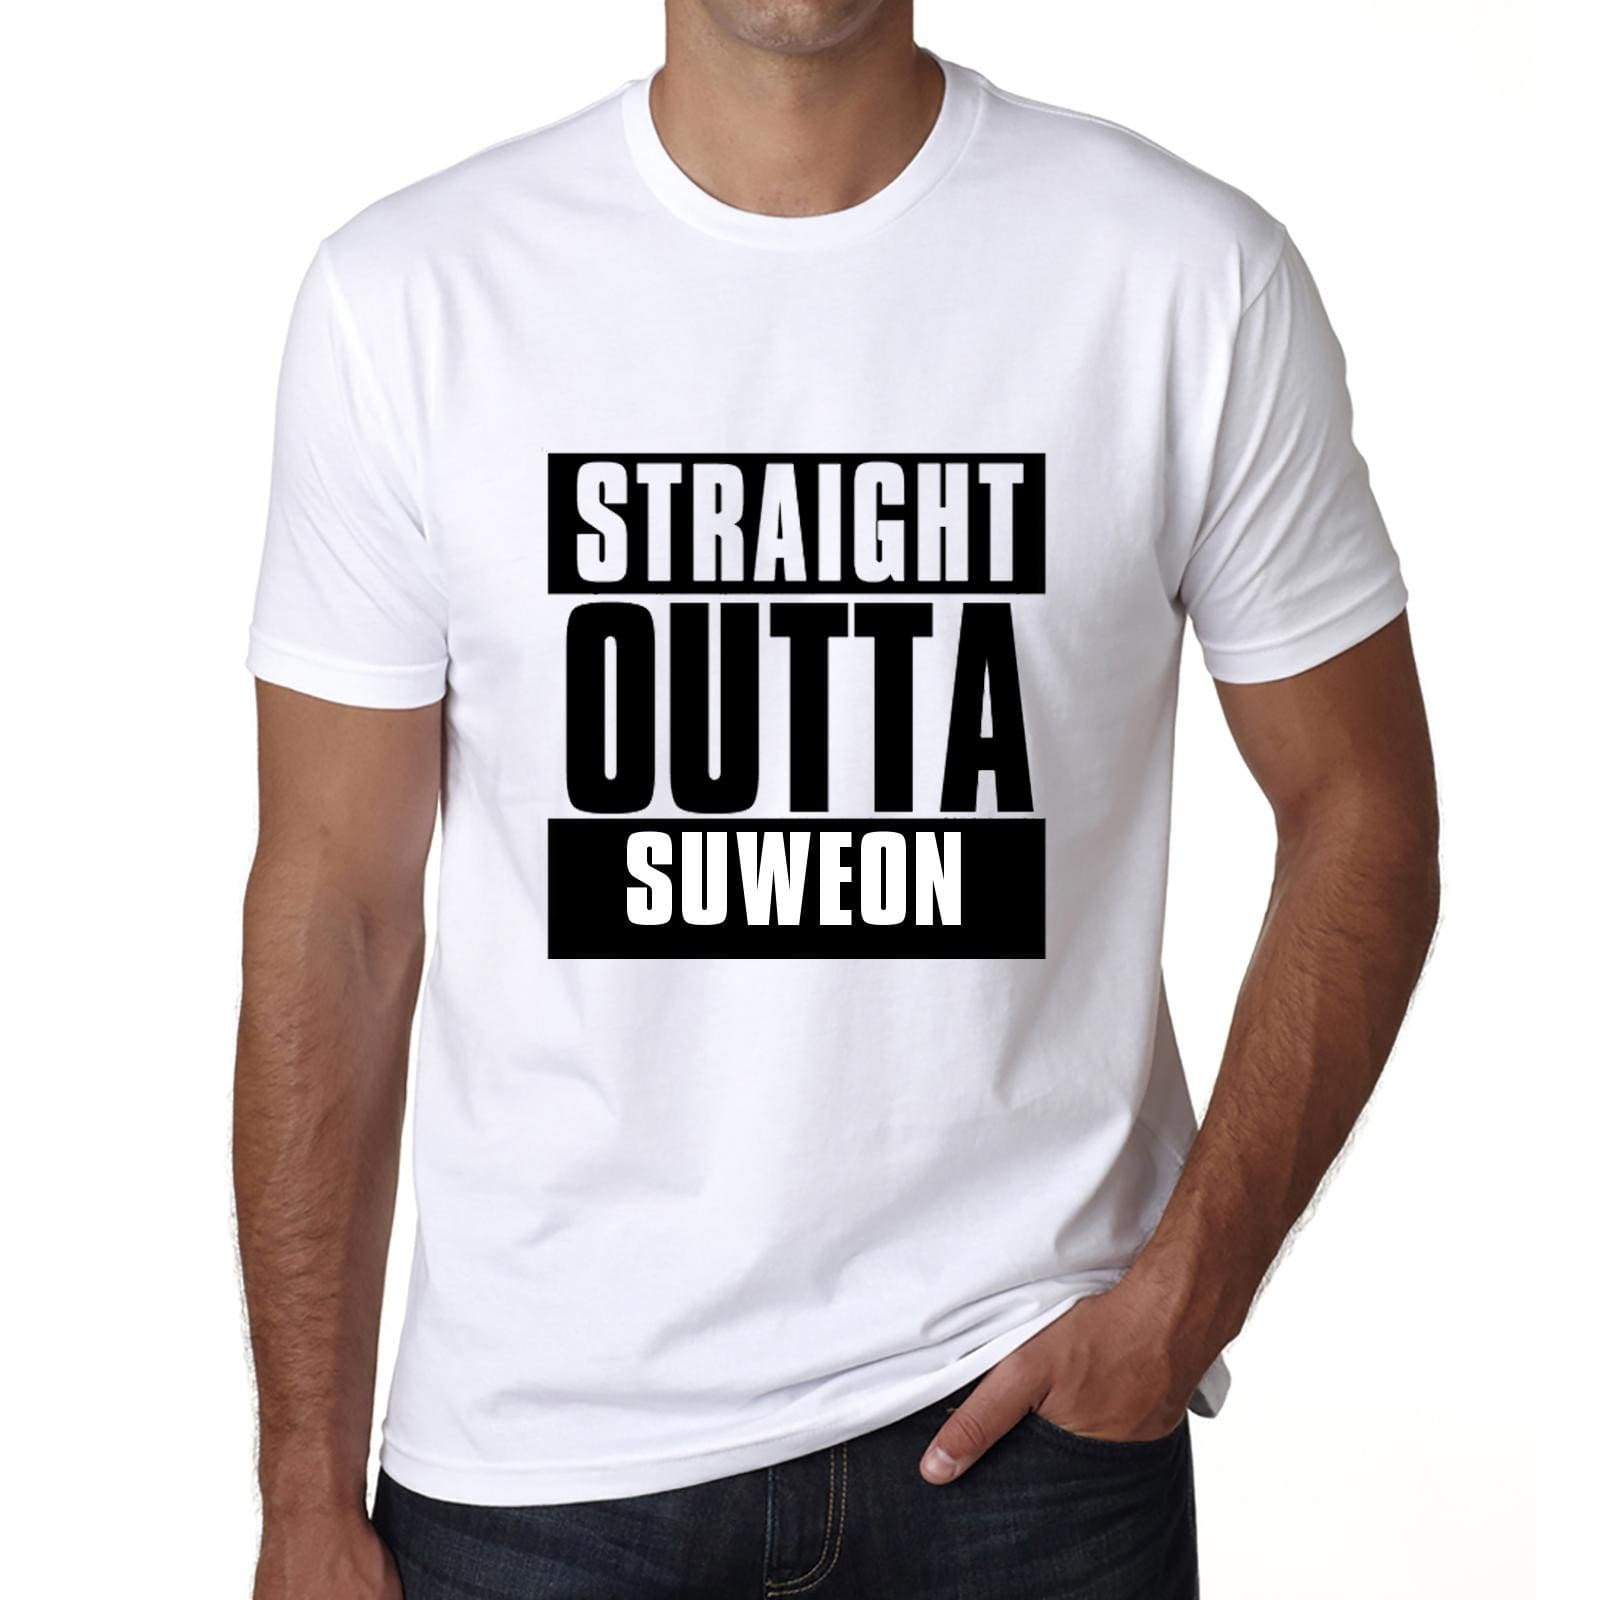 Straight Outta Suweon Mens Short Sleeve Round Neck T-Shirt 00027 - White / S - Casual